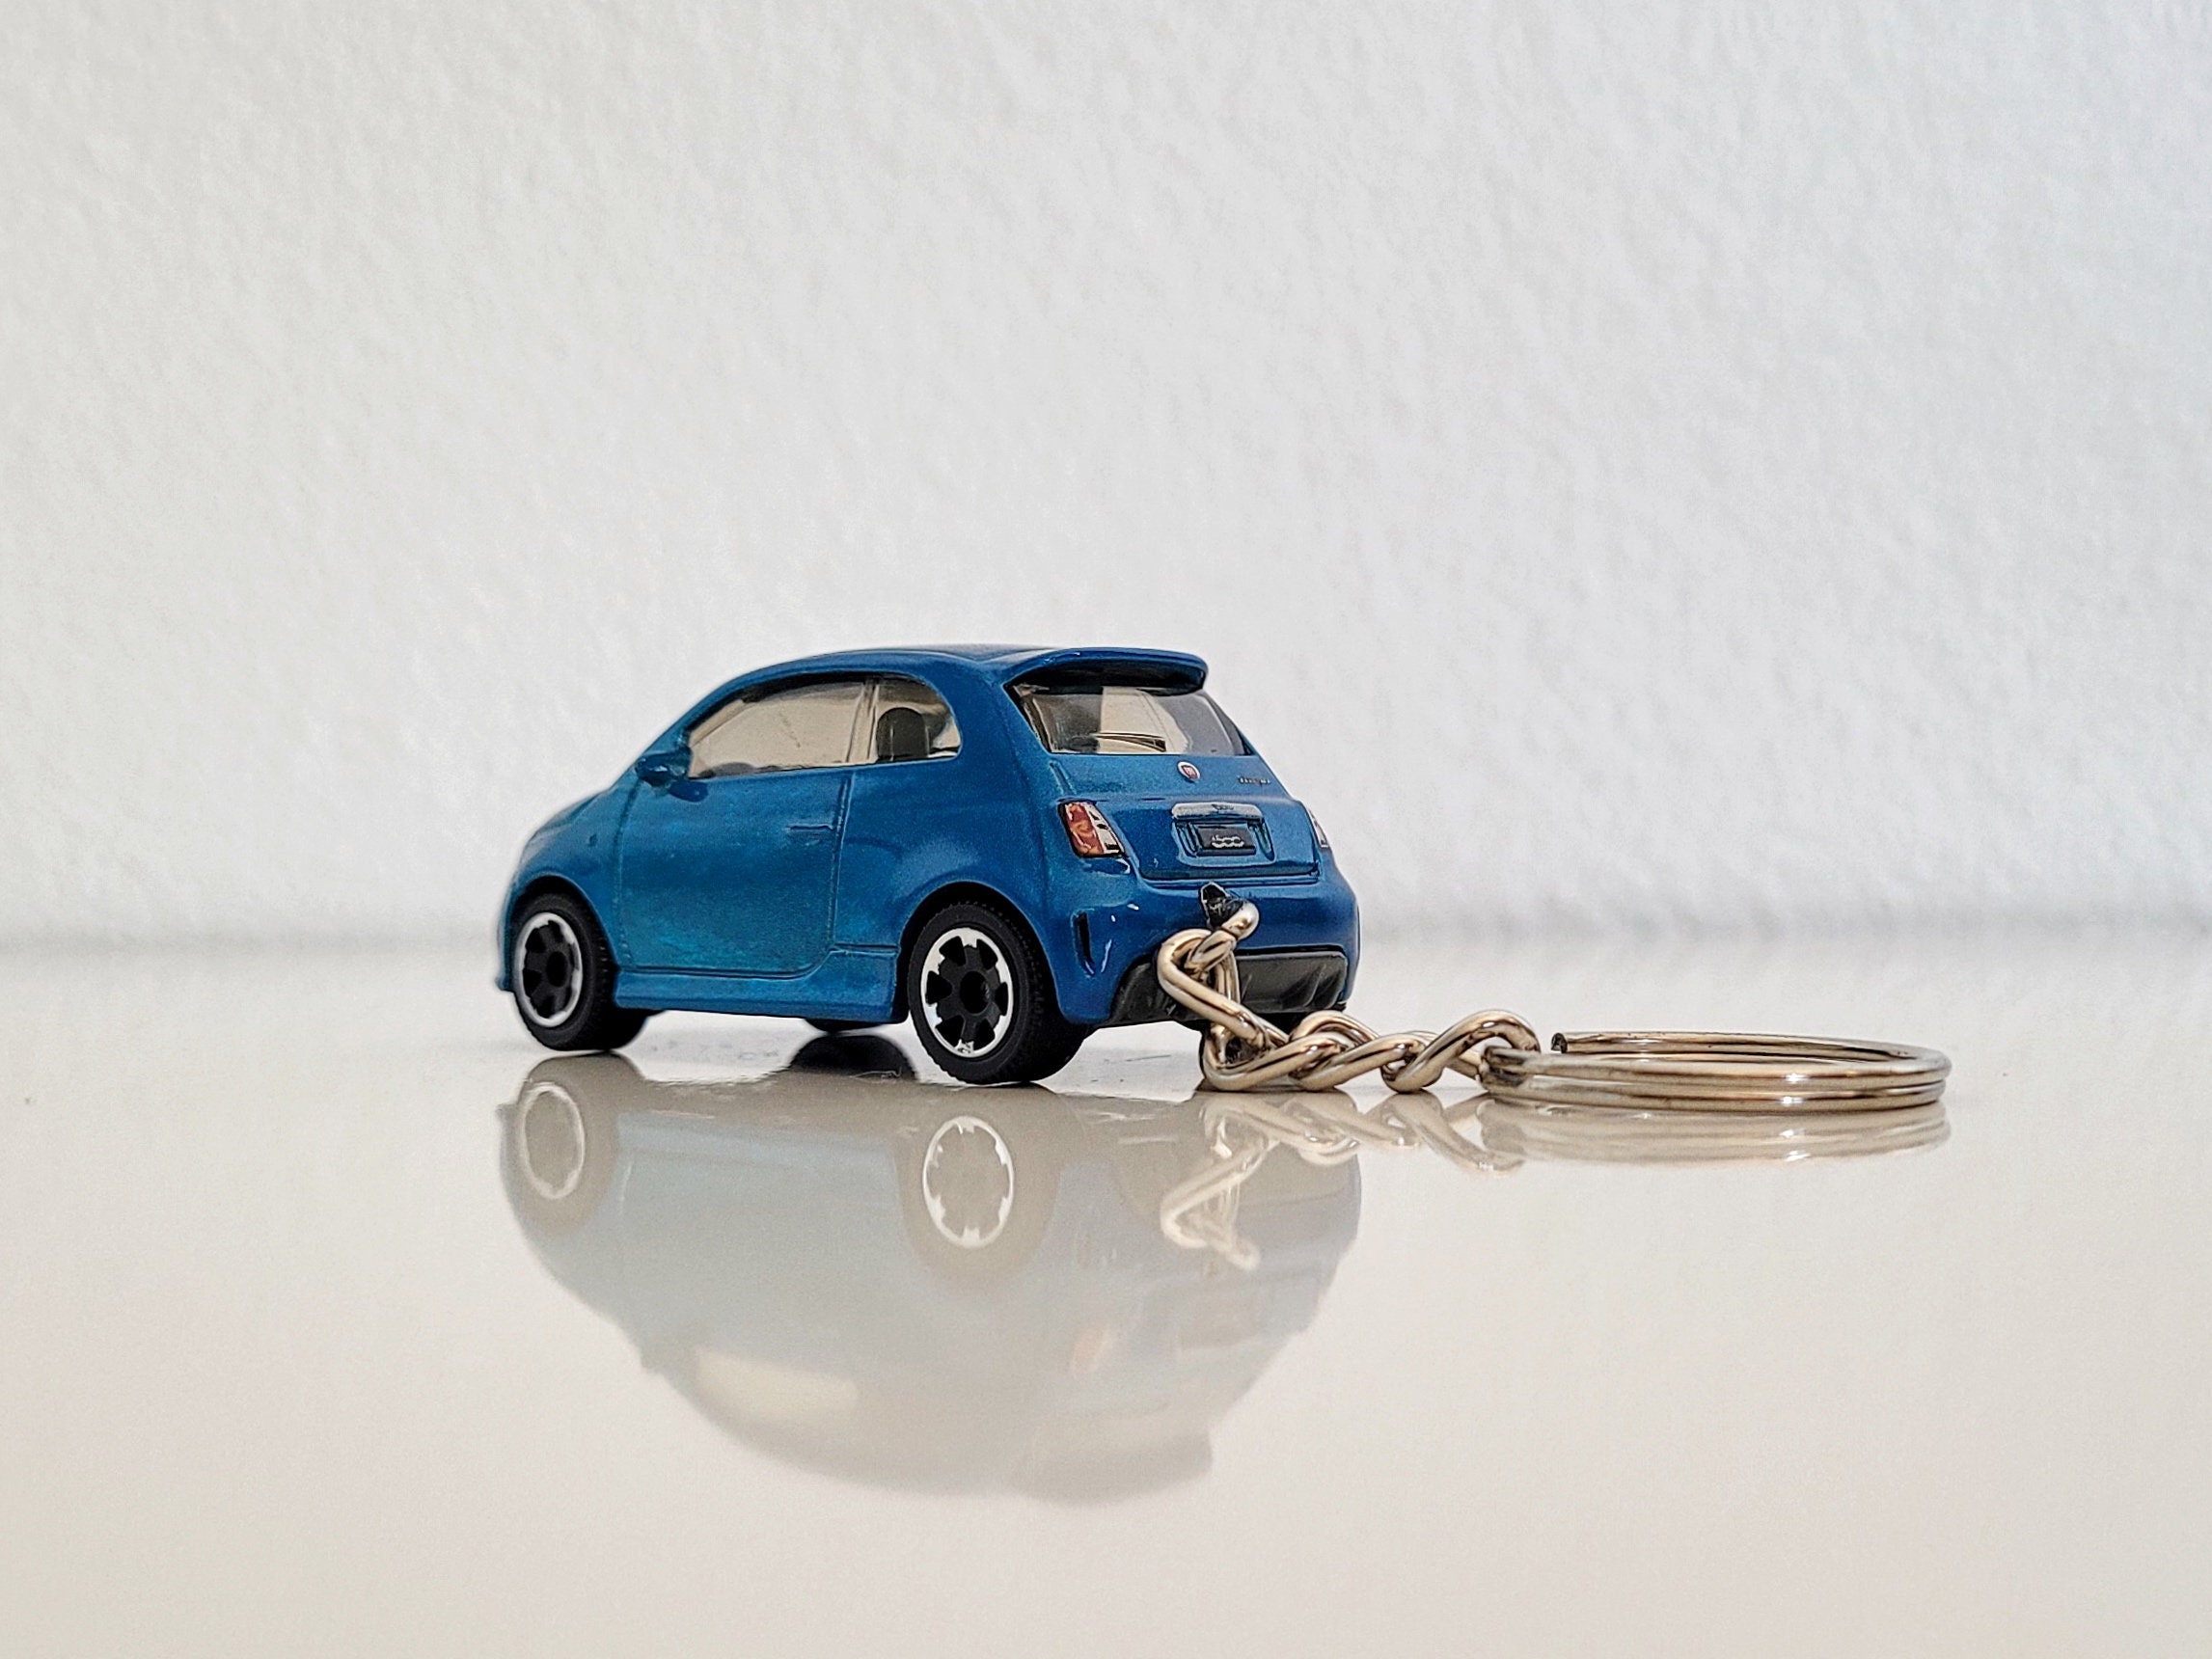 Buy Fiat 500 Matchbox Diecast on Key Chain Online in India 